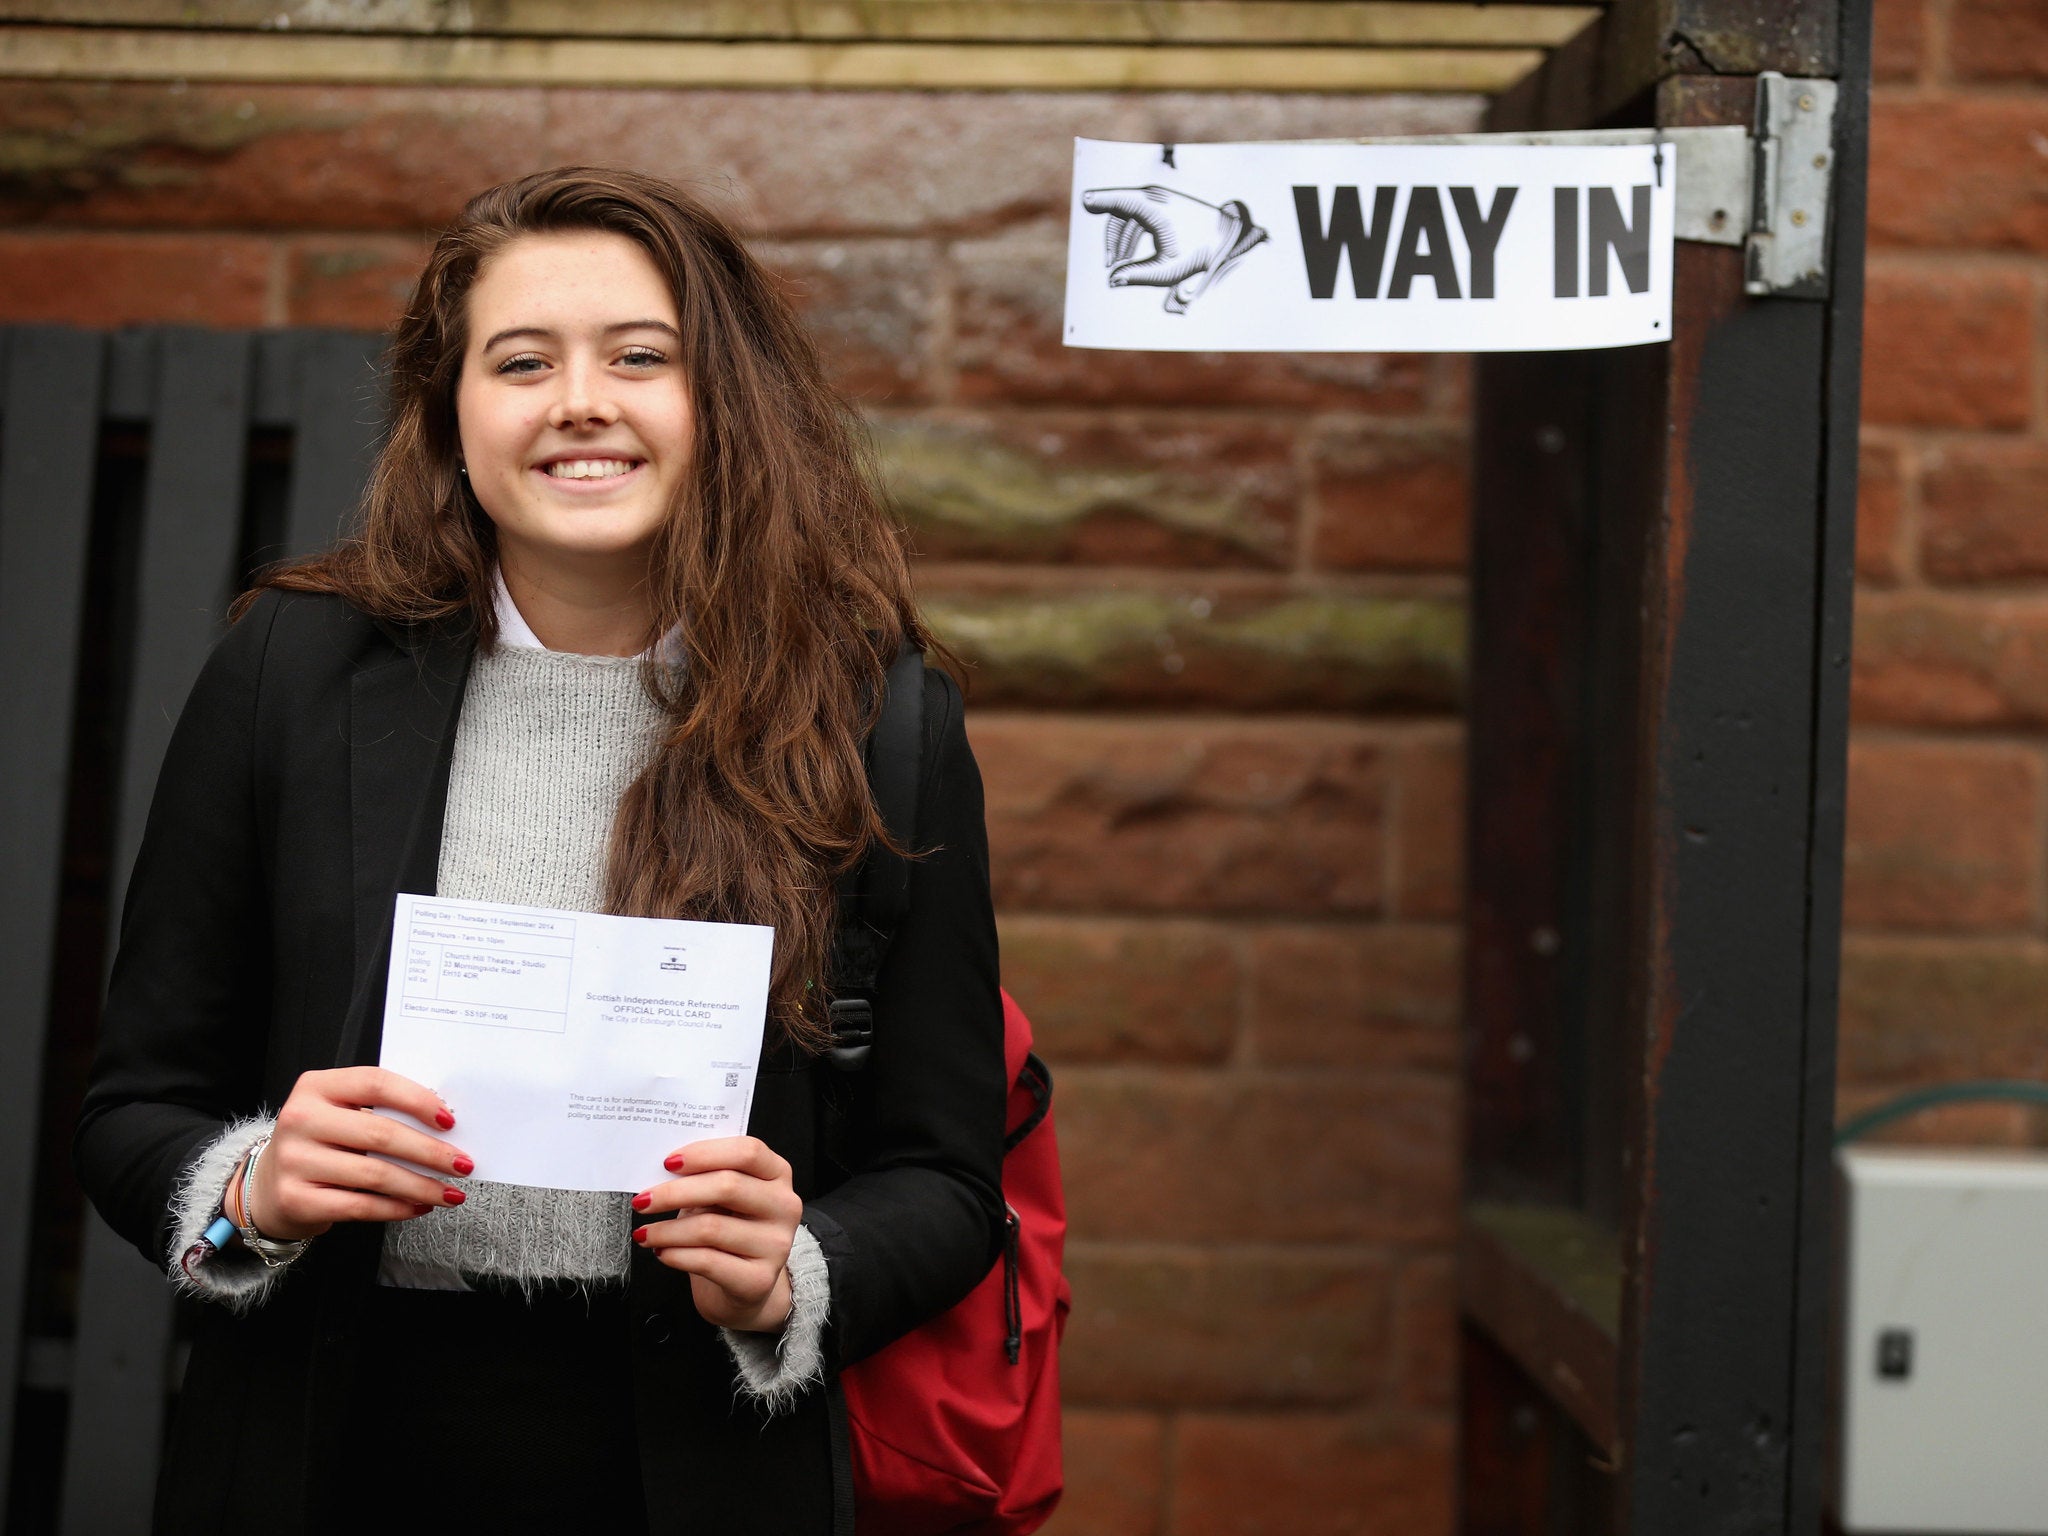 17-year-old Ivy Hare, before voting in the independence referendum in September 2014.